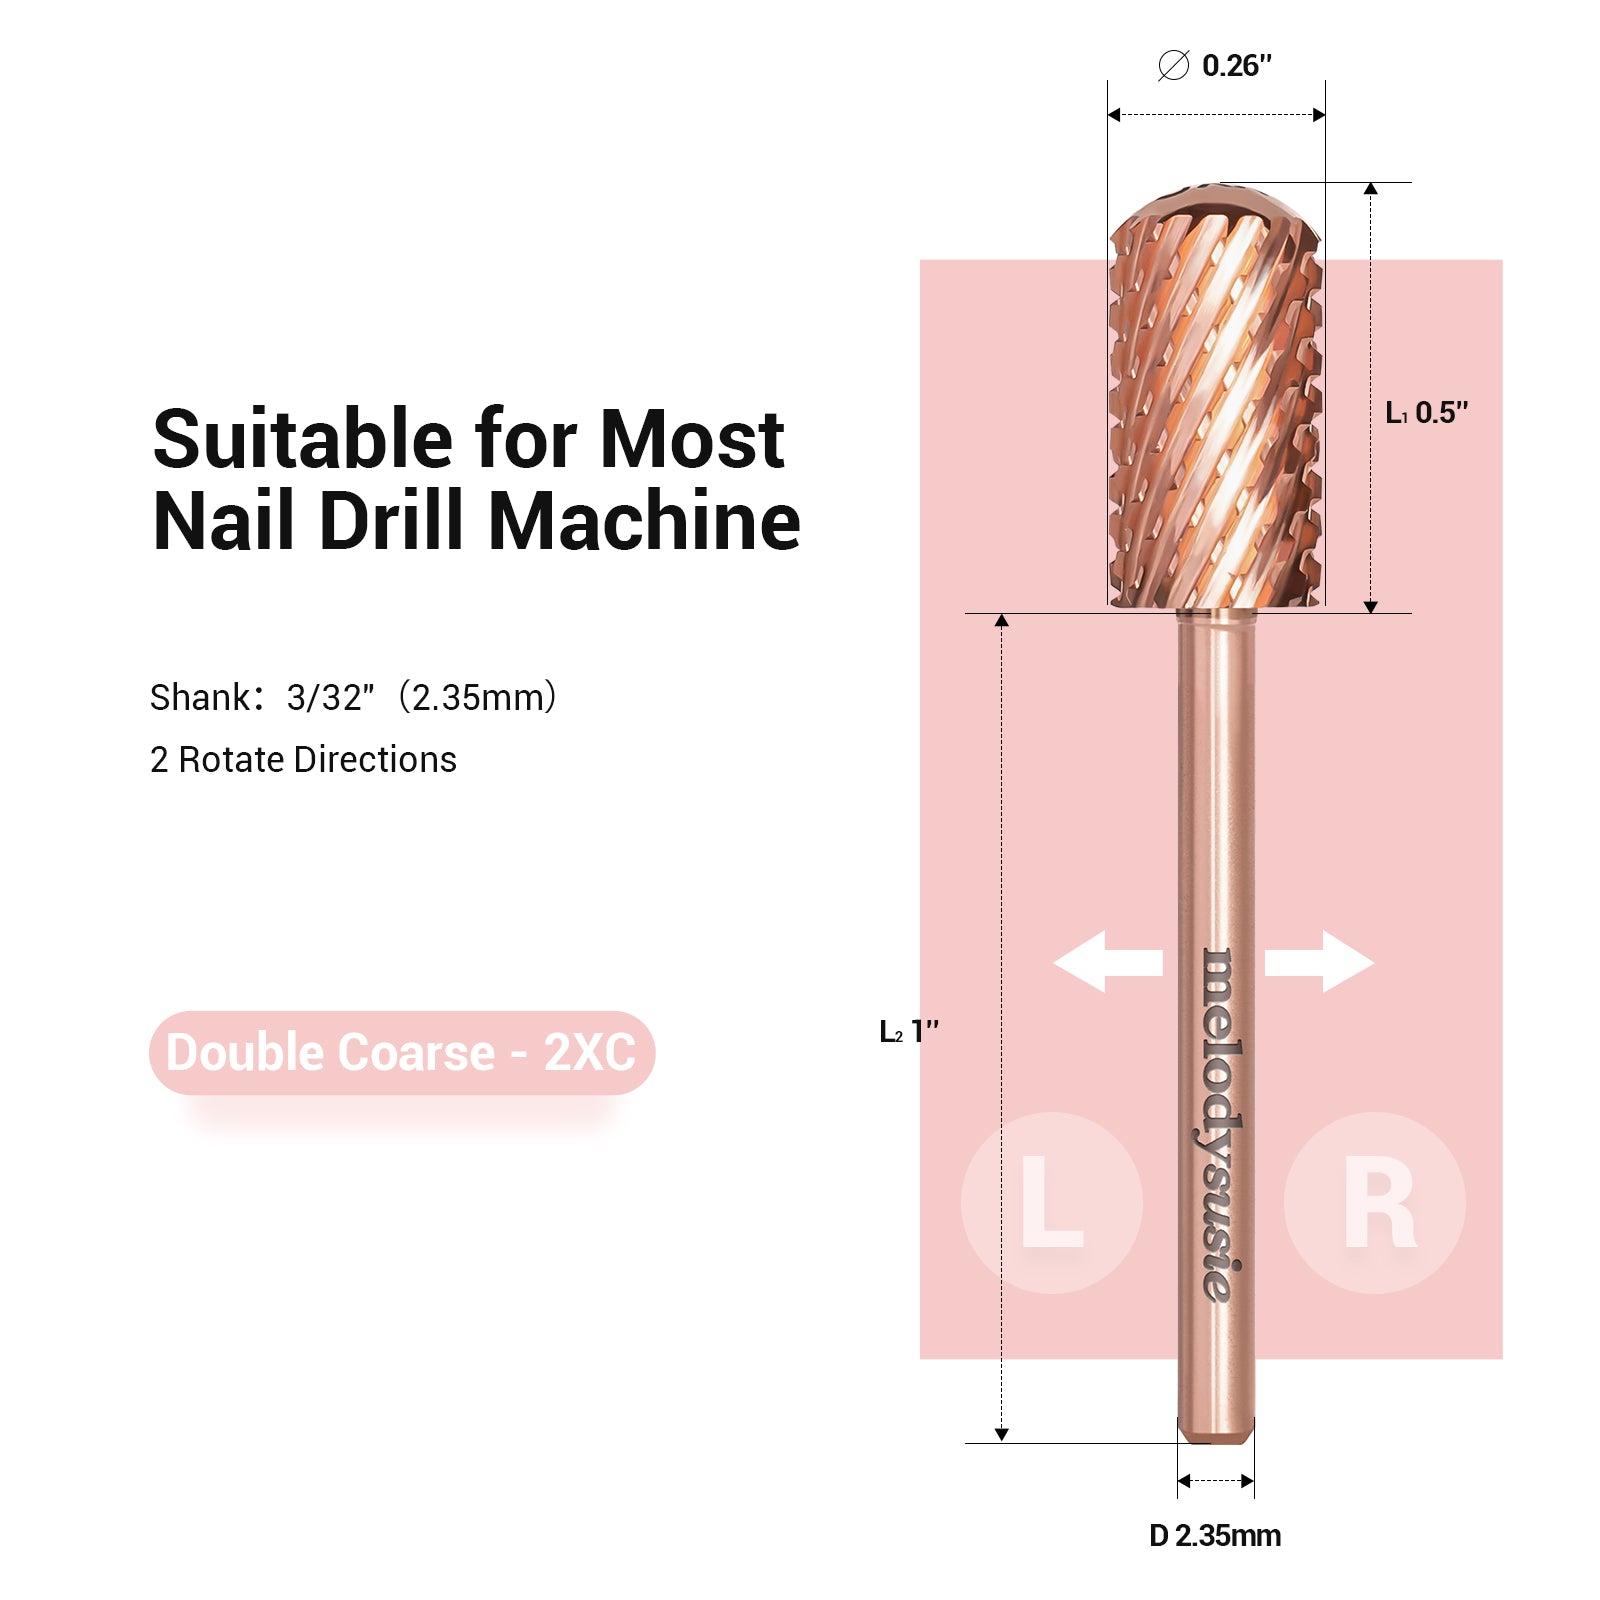 Large Barrel Smooth Top Tungsten Carbide Nail Drill Bits-Double Coarse(1pc)